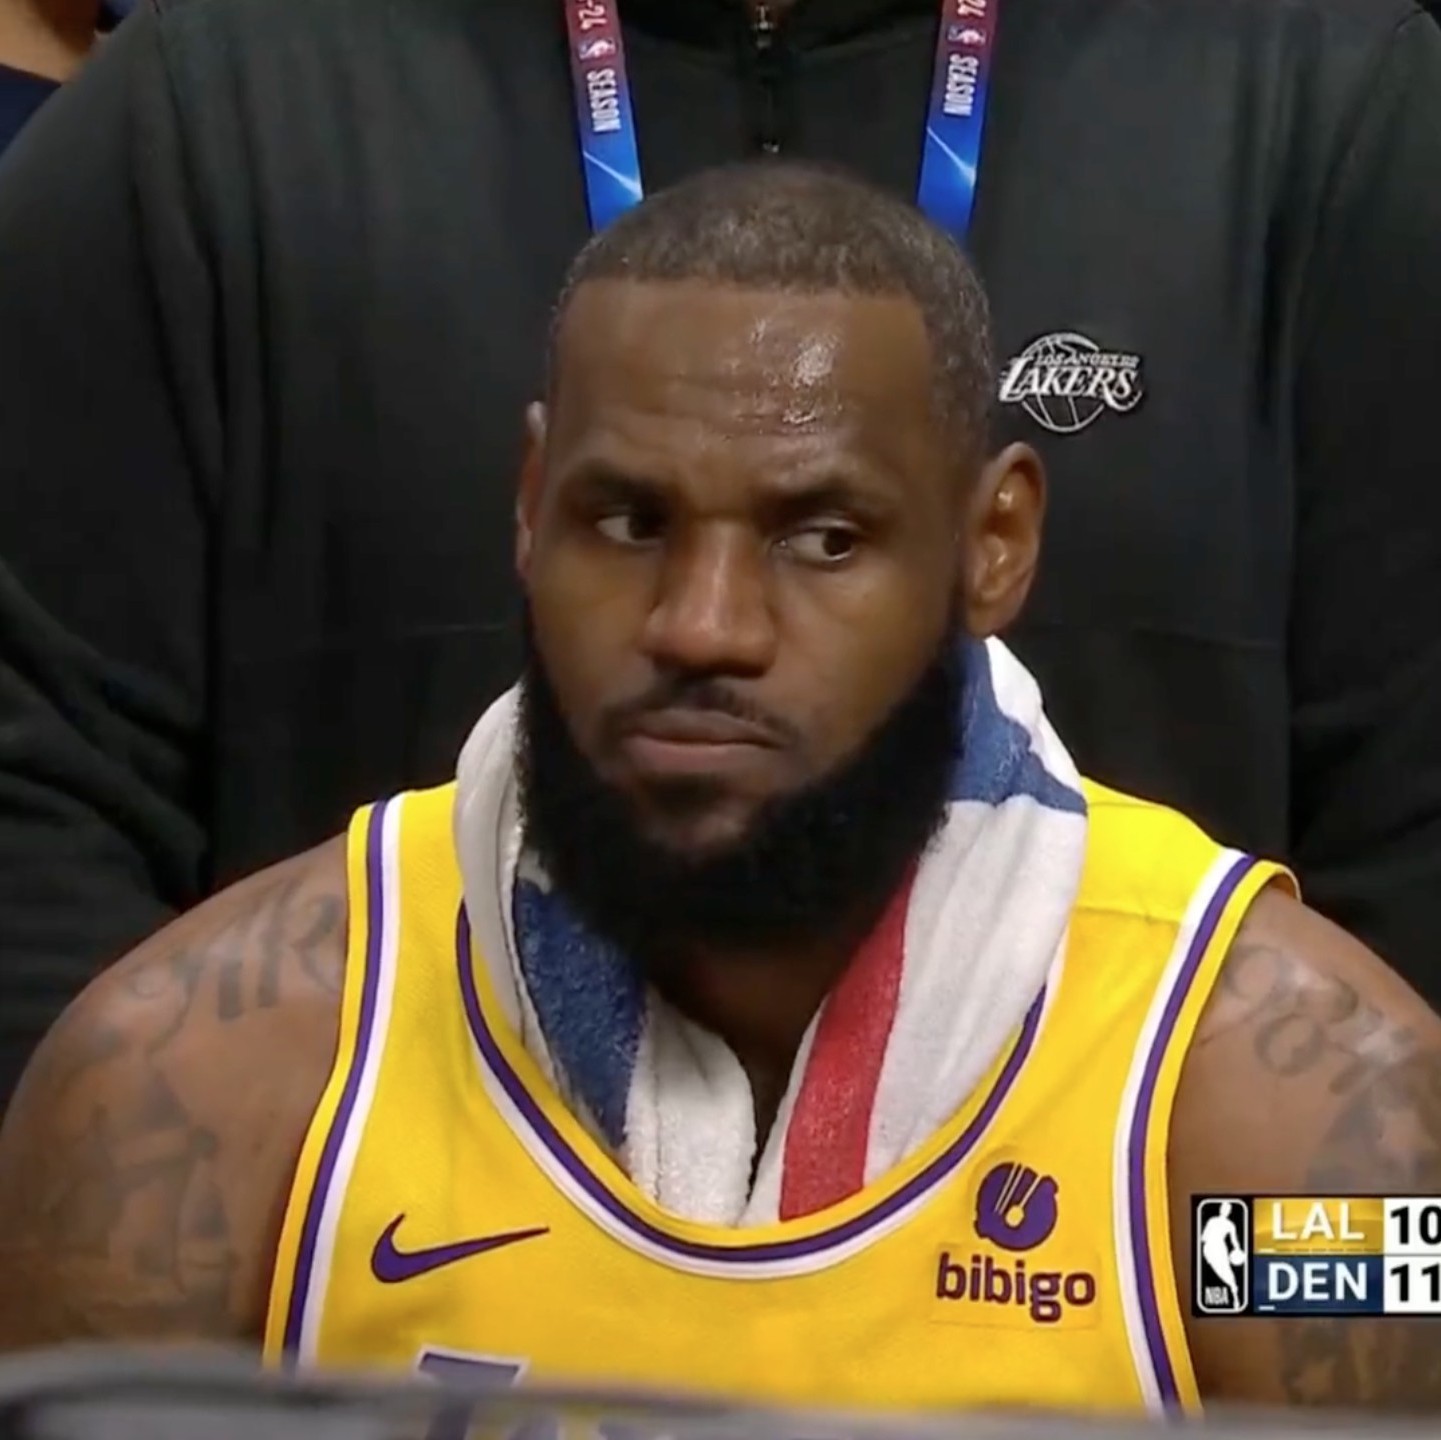 LeBron James' 'frustrated' reaction on LA Lakers bench caught on live TV as Denver Nuggets fans scream brutal chant | The US Sun